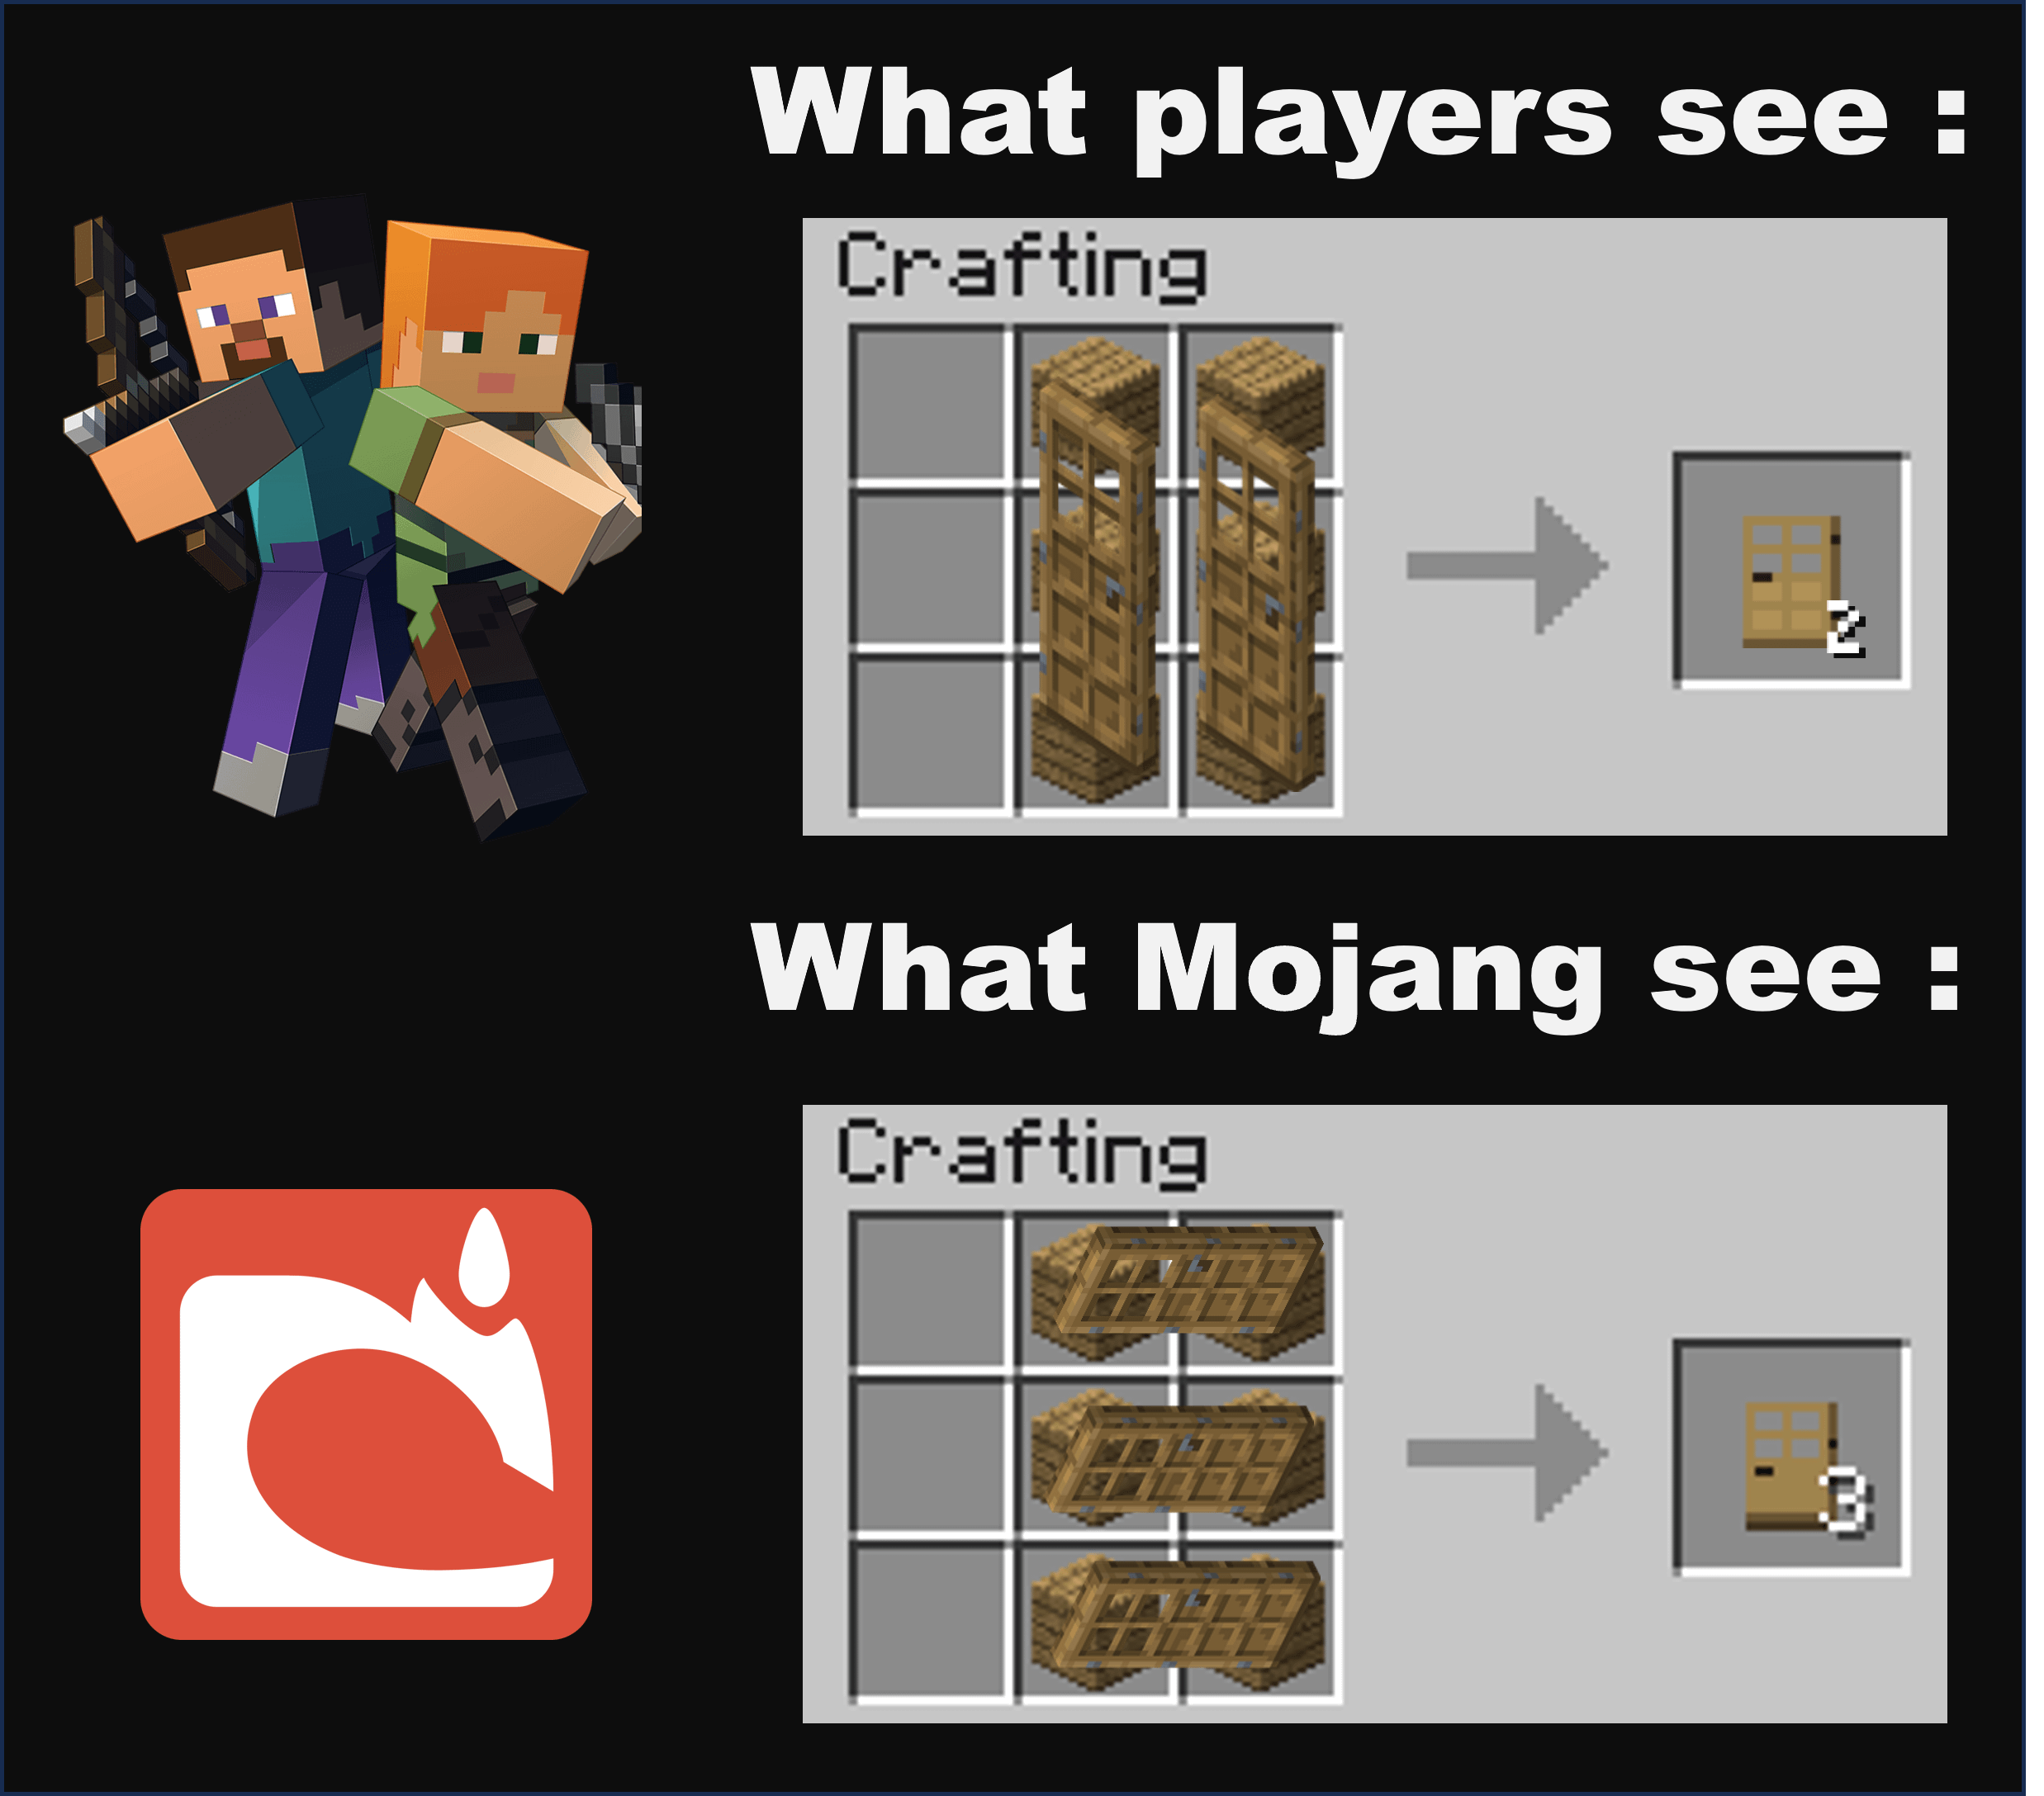 Minecraft Memes - "Spice up your game with Oak Door Meme"